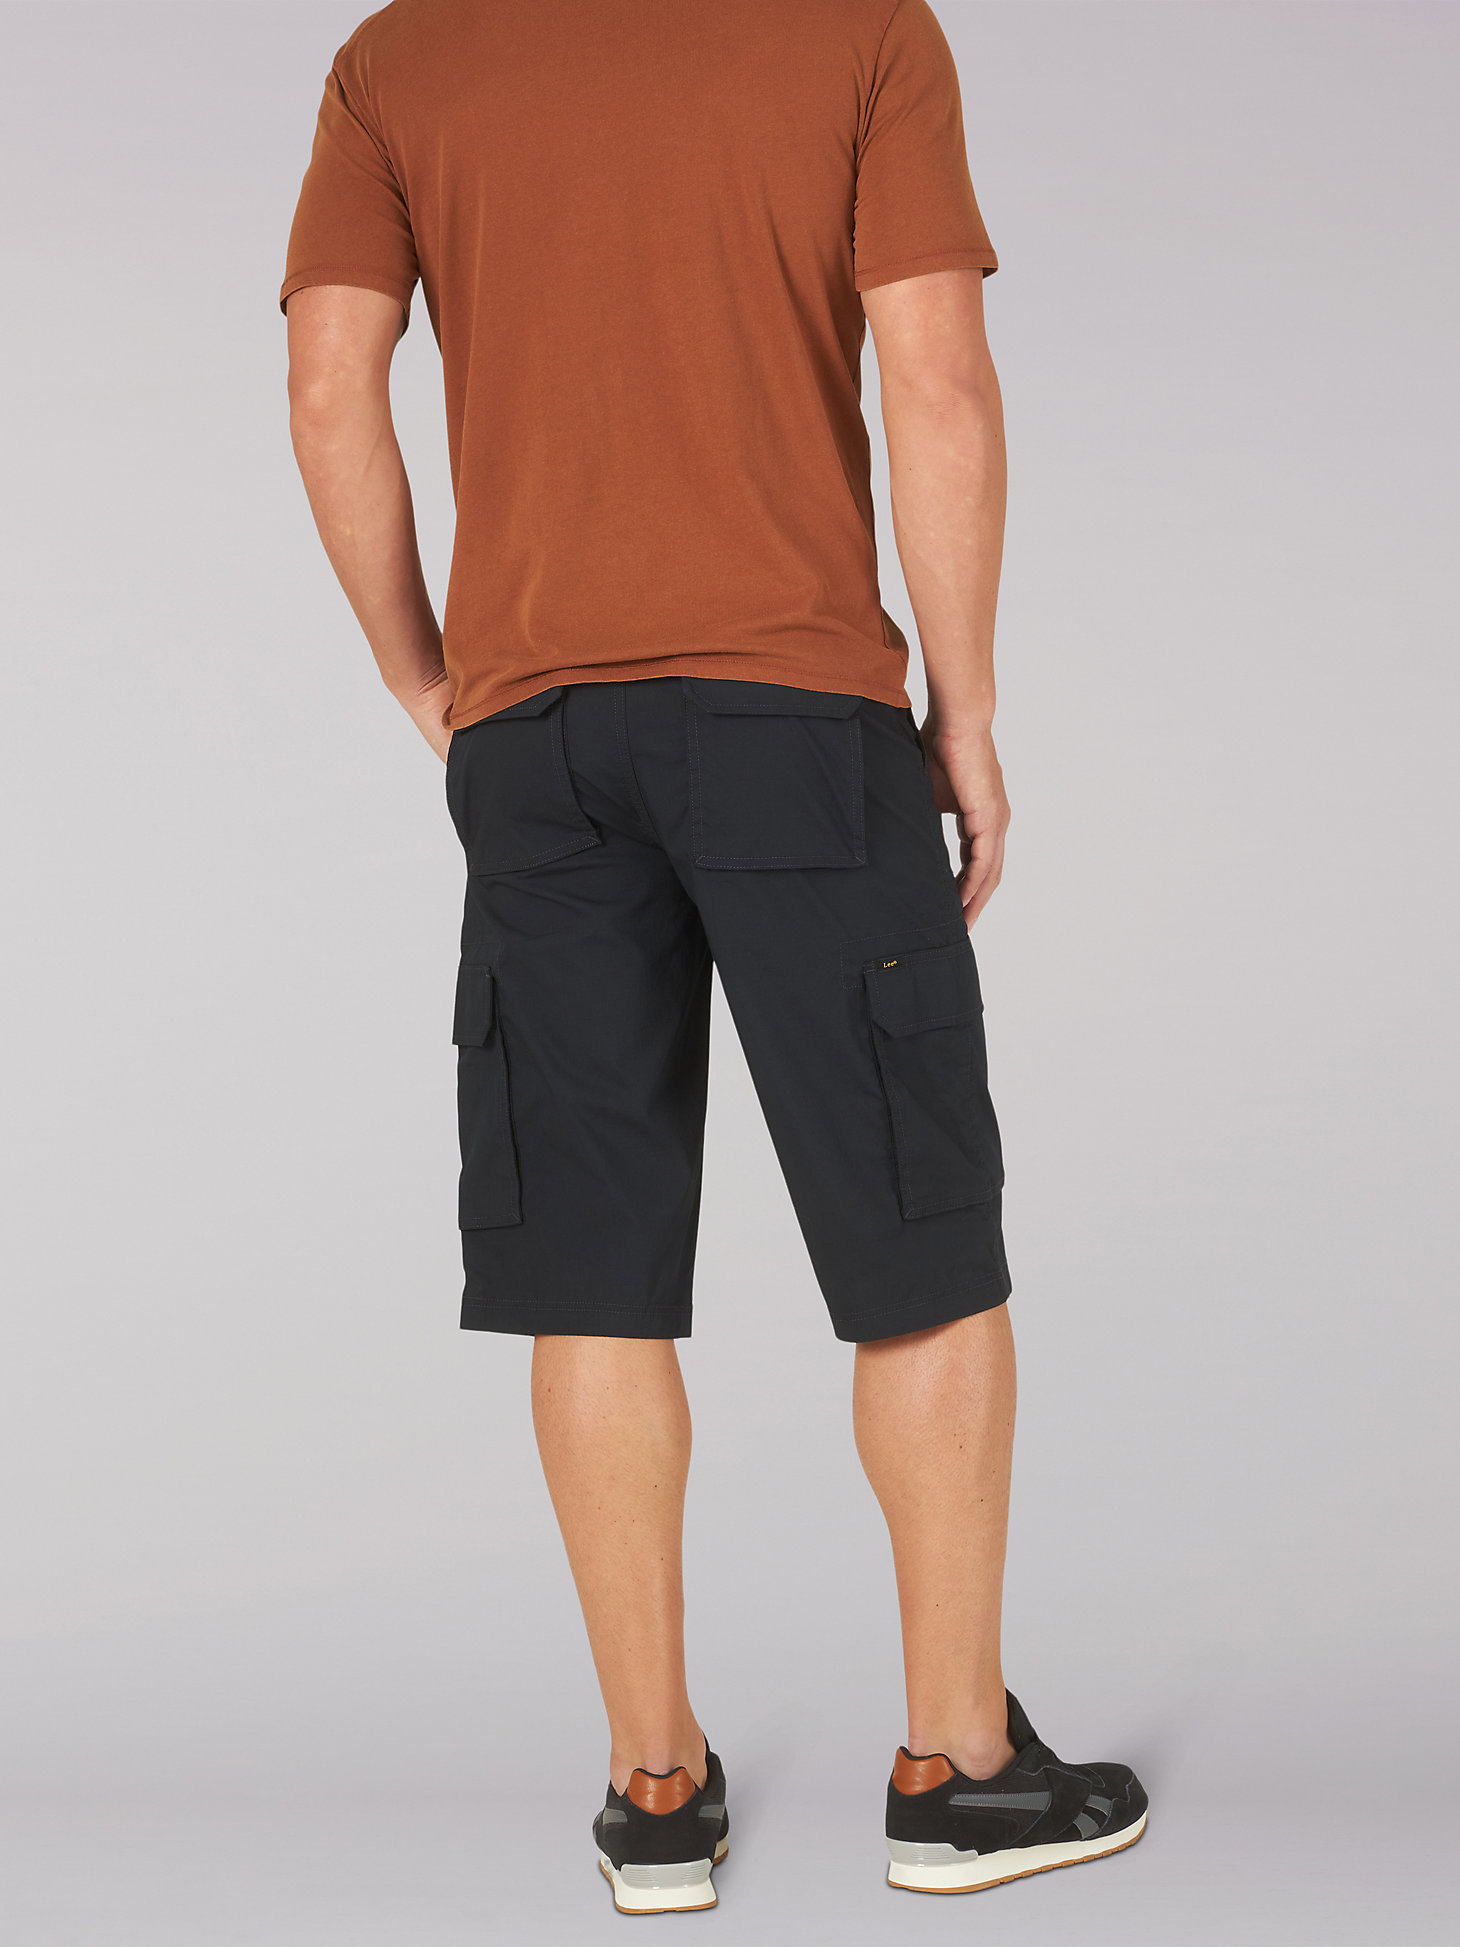 Men's Extreme Motion Cameron Relaxed Fit Cargo Short in Union All Black alternative view 1